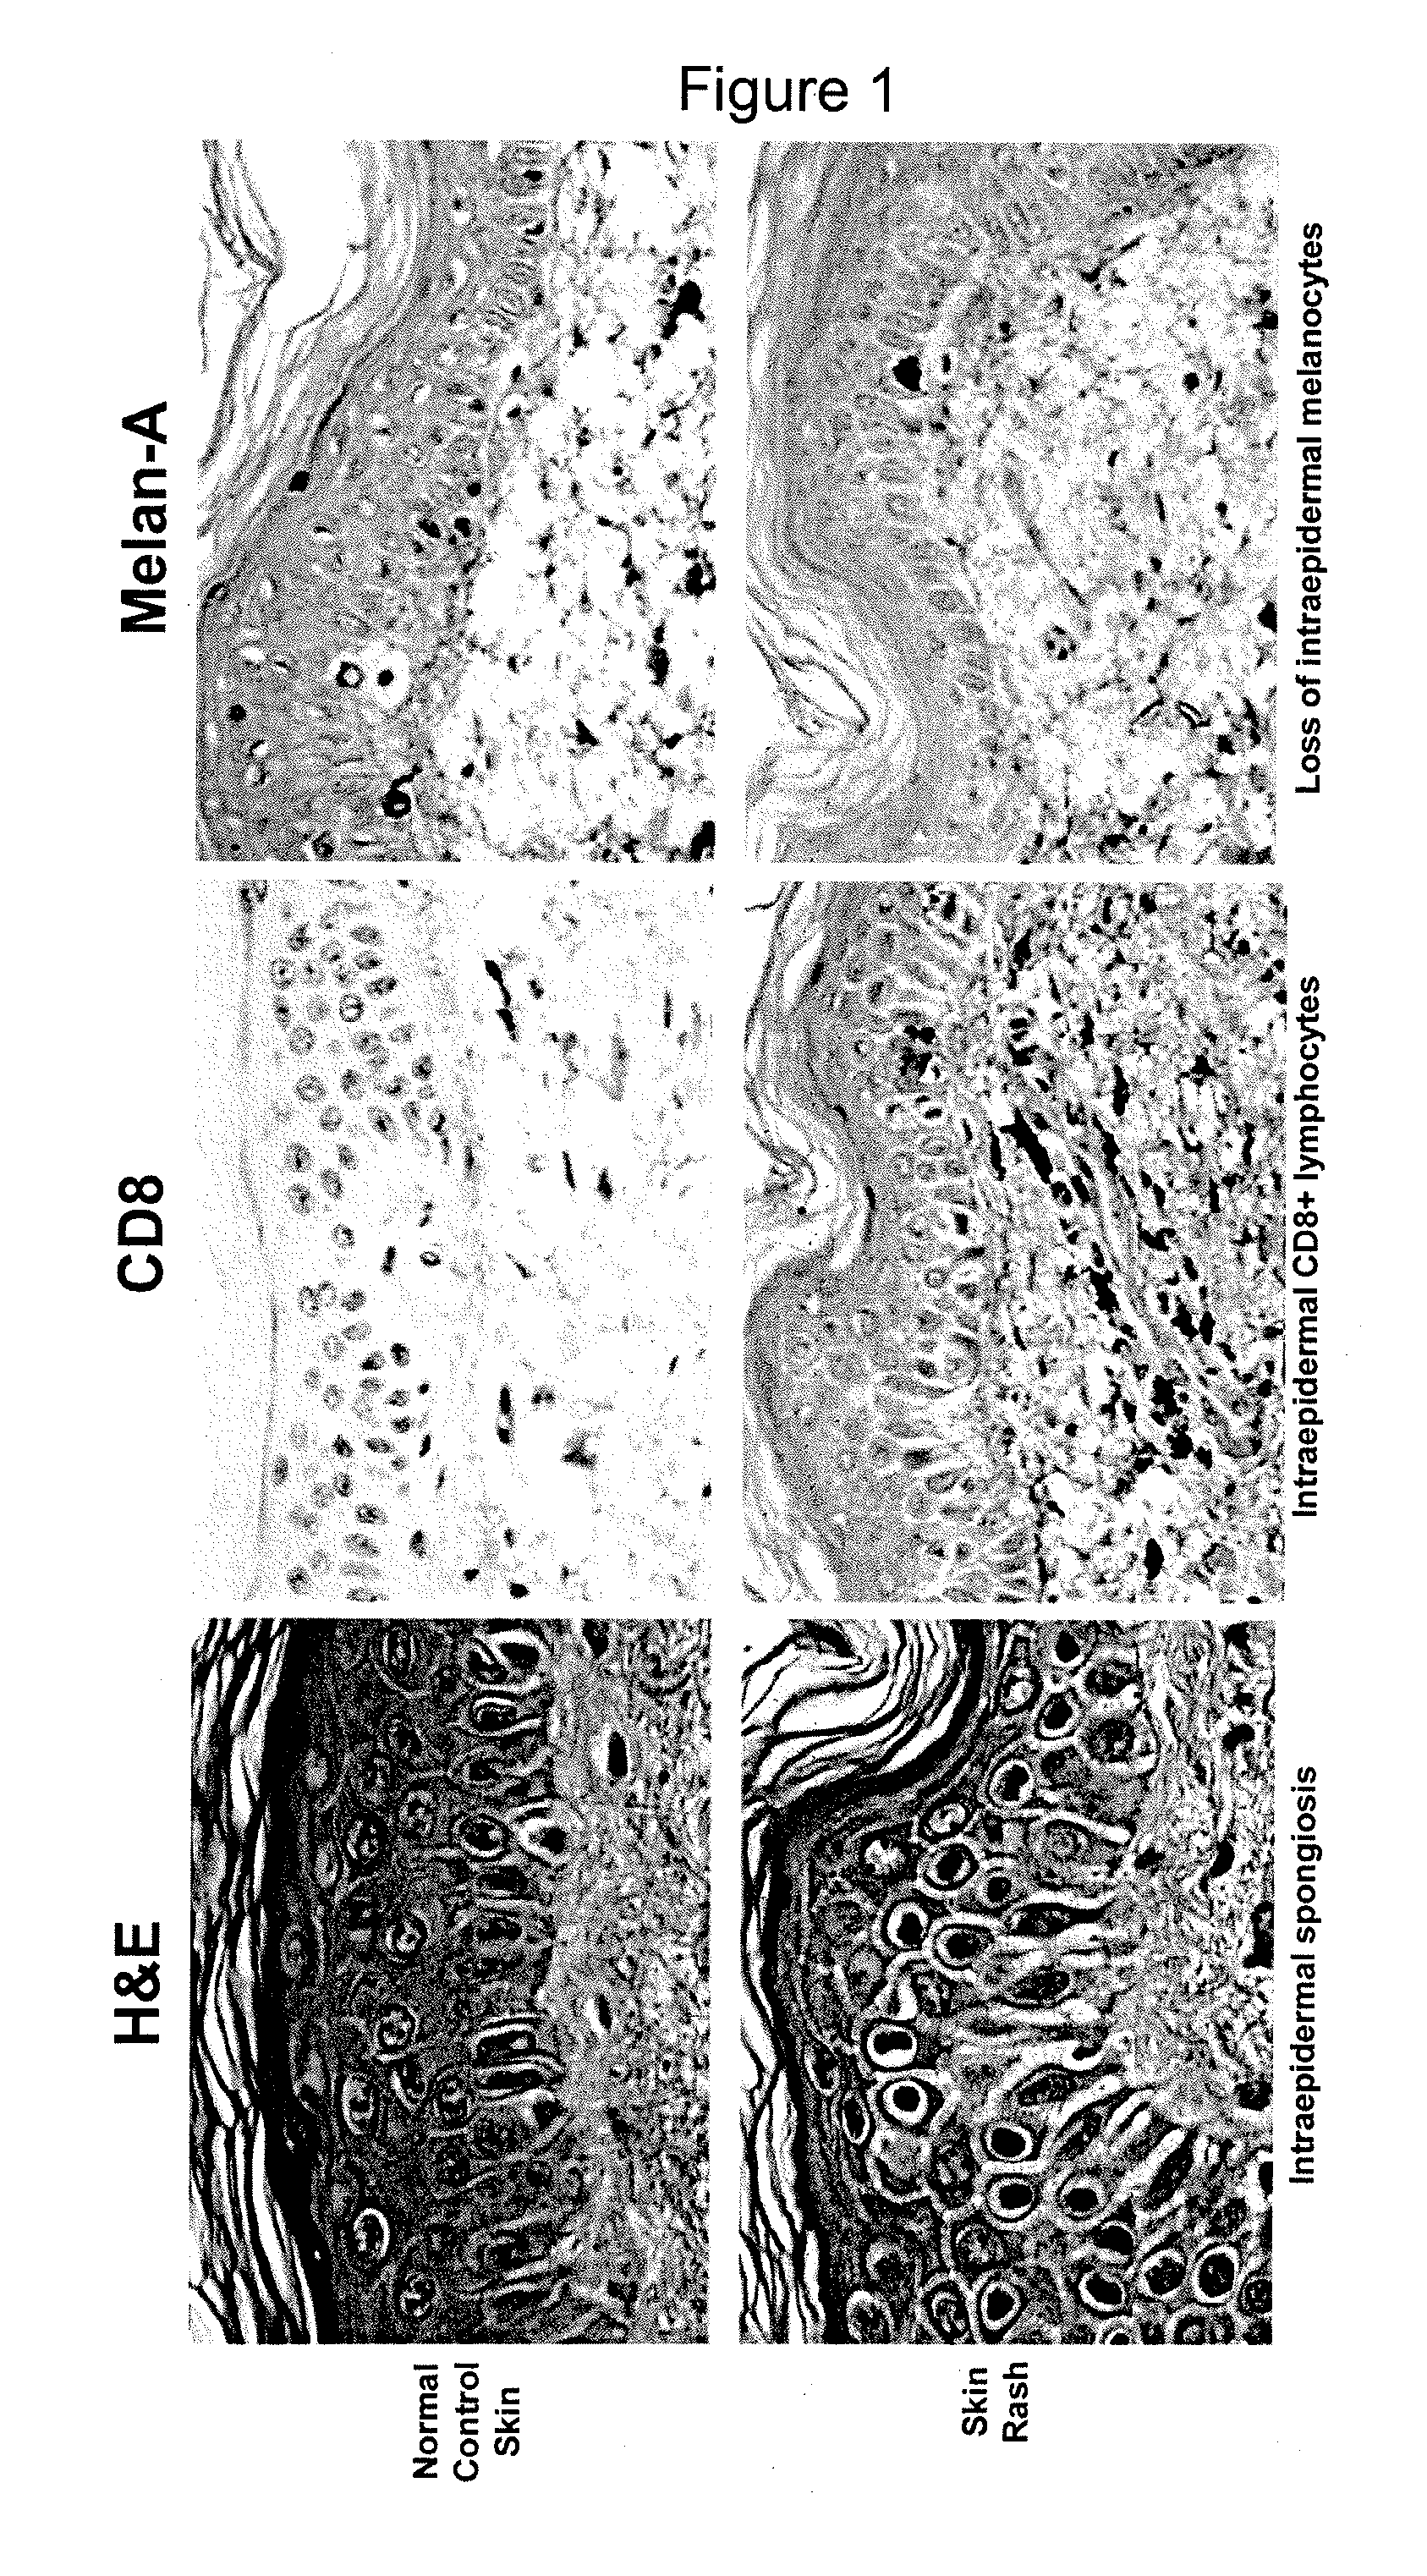 Methods of identifying central memory t cells and obtaining antigen-specific t cell populations